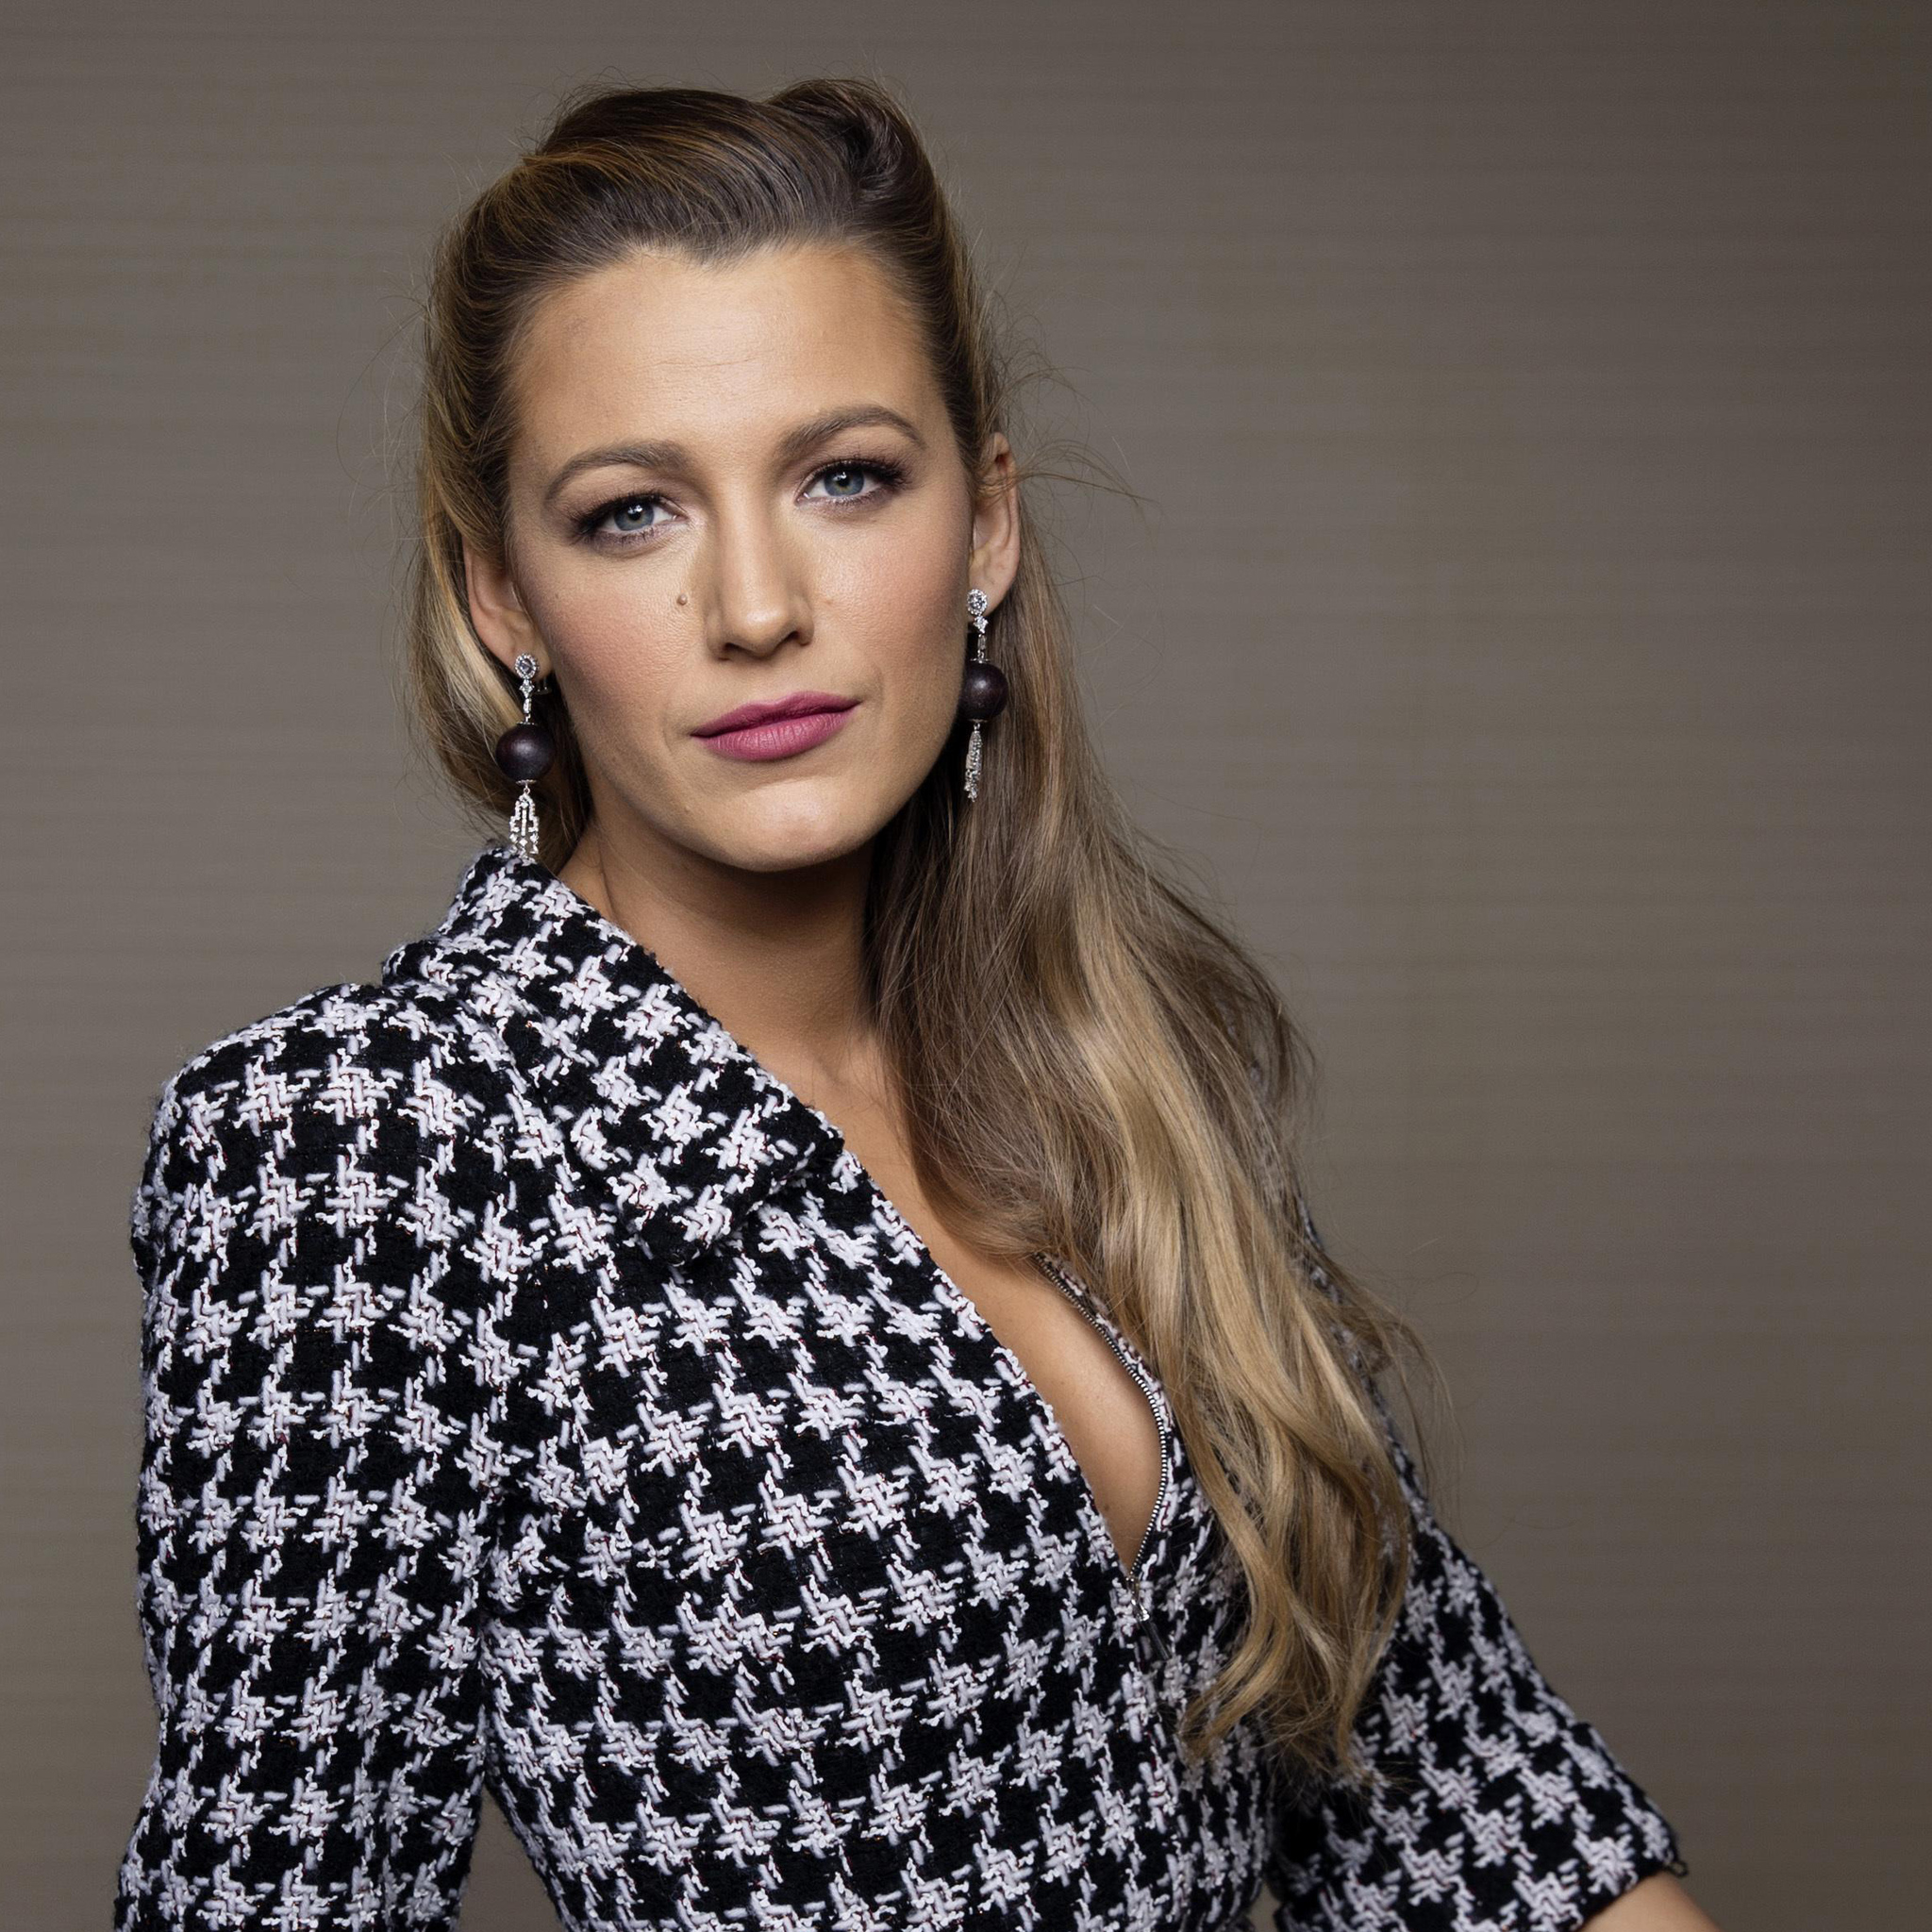 2048x2048 Blake Lively 2019 Ipad Air ,HD 4k Wallpapers,Images ...